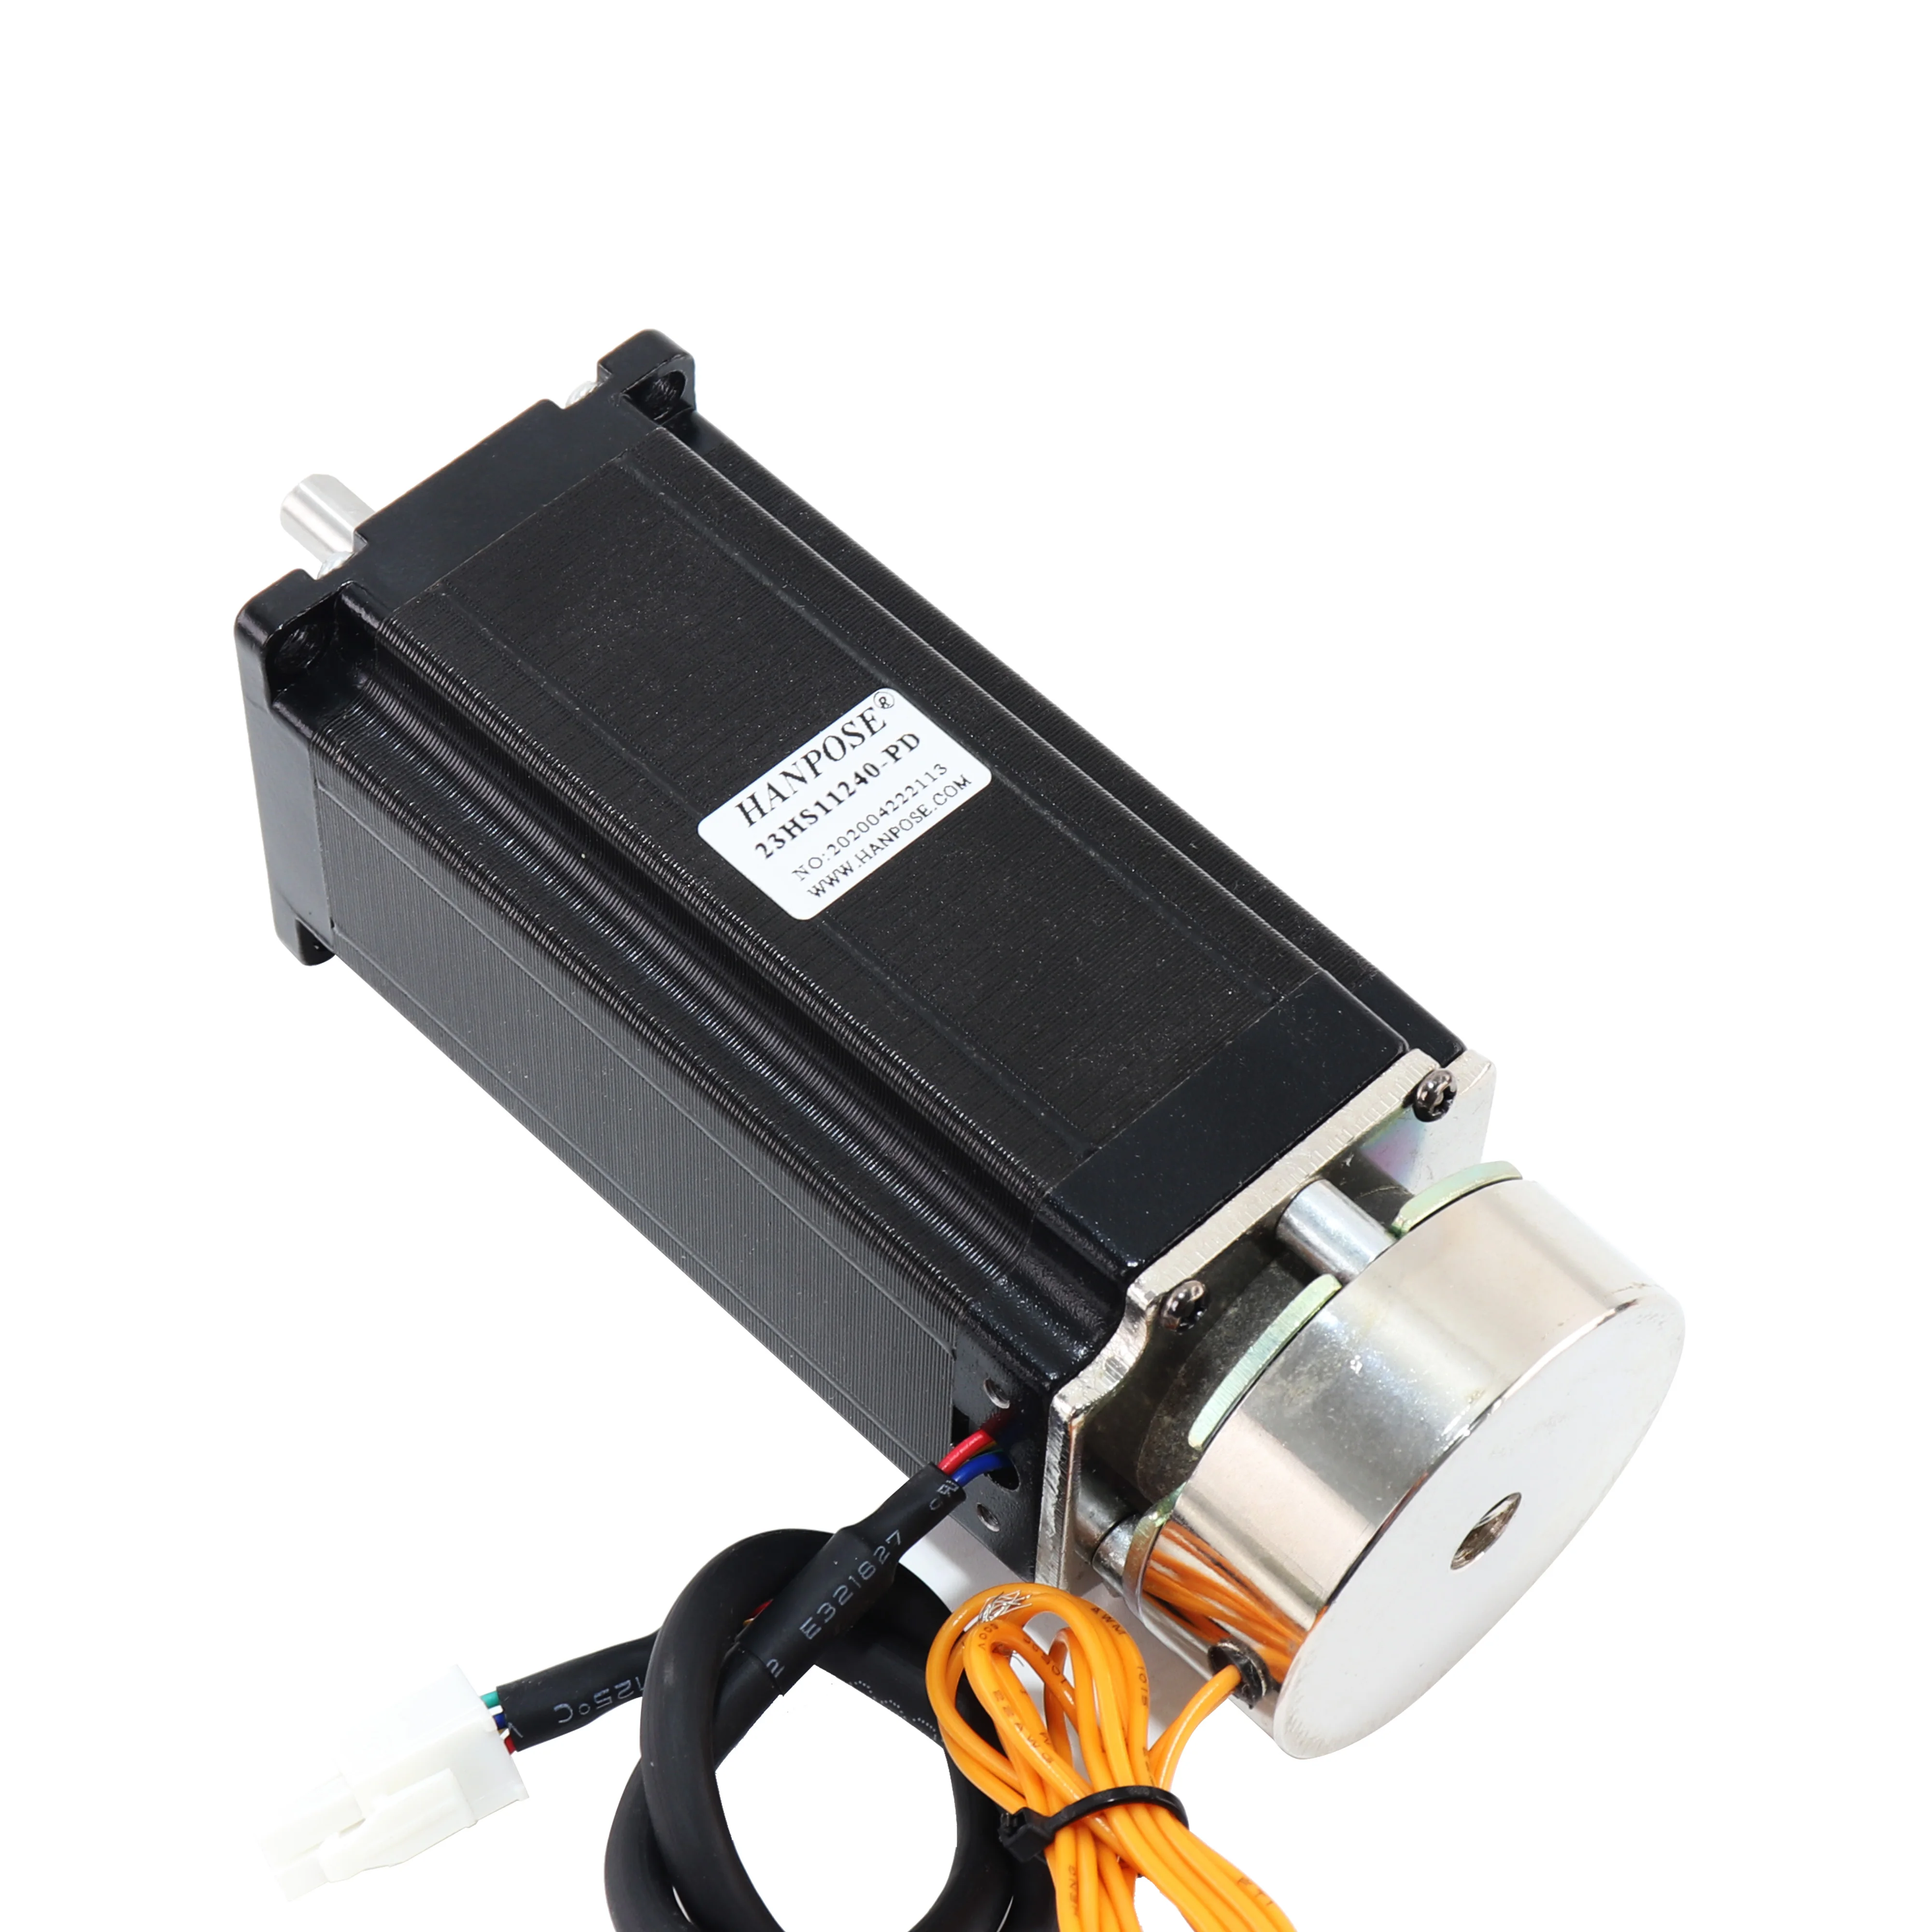 New product promotion 57 brake stepping motor integration 23HS11240 large torque 300N. Cm power off holding 3D print